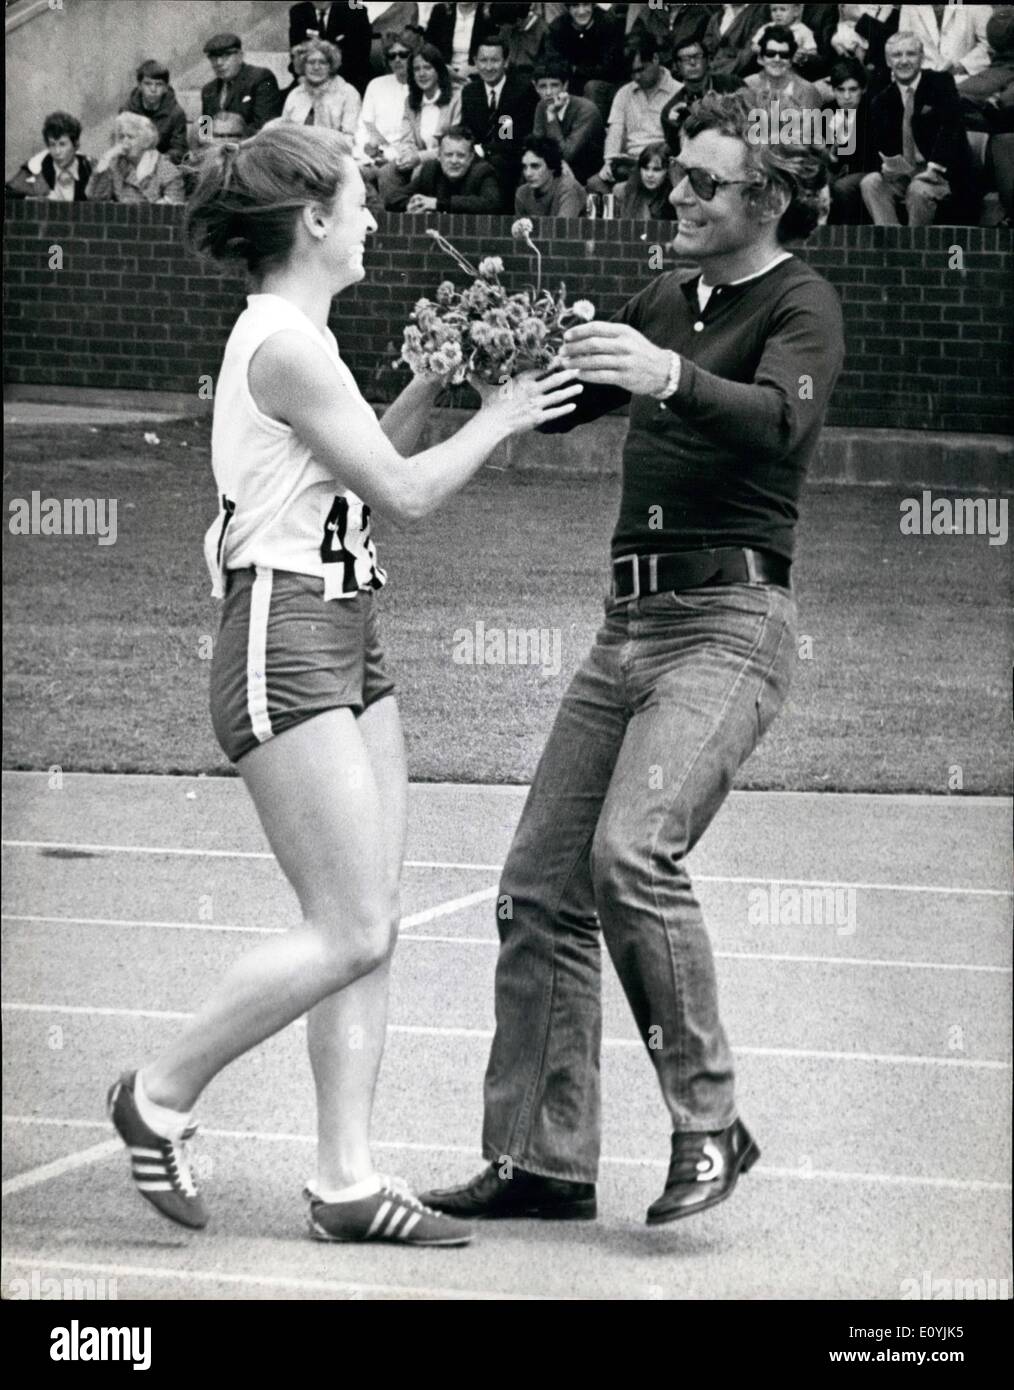 Jul. 07, 1970 - The Commonwealth Games In Edinburgh. Photo Shows:- S. Berto anada) is presented with a bouquet of flowers by J Stock Photo